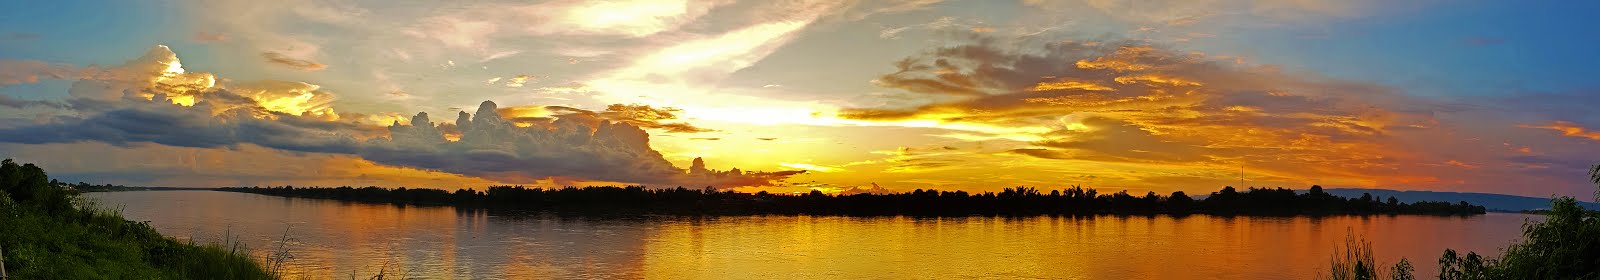 Sunset Over the Mekong River